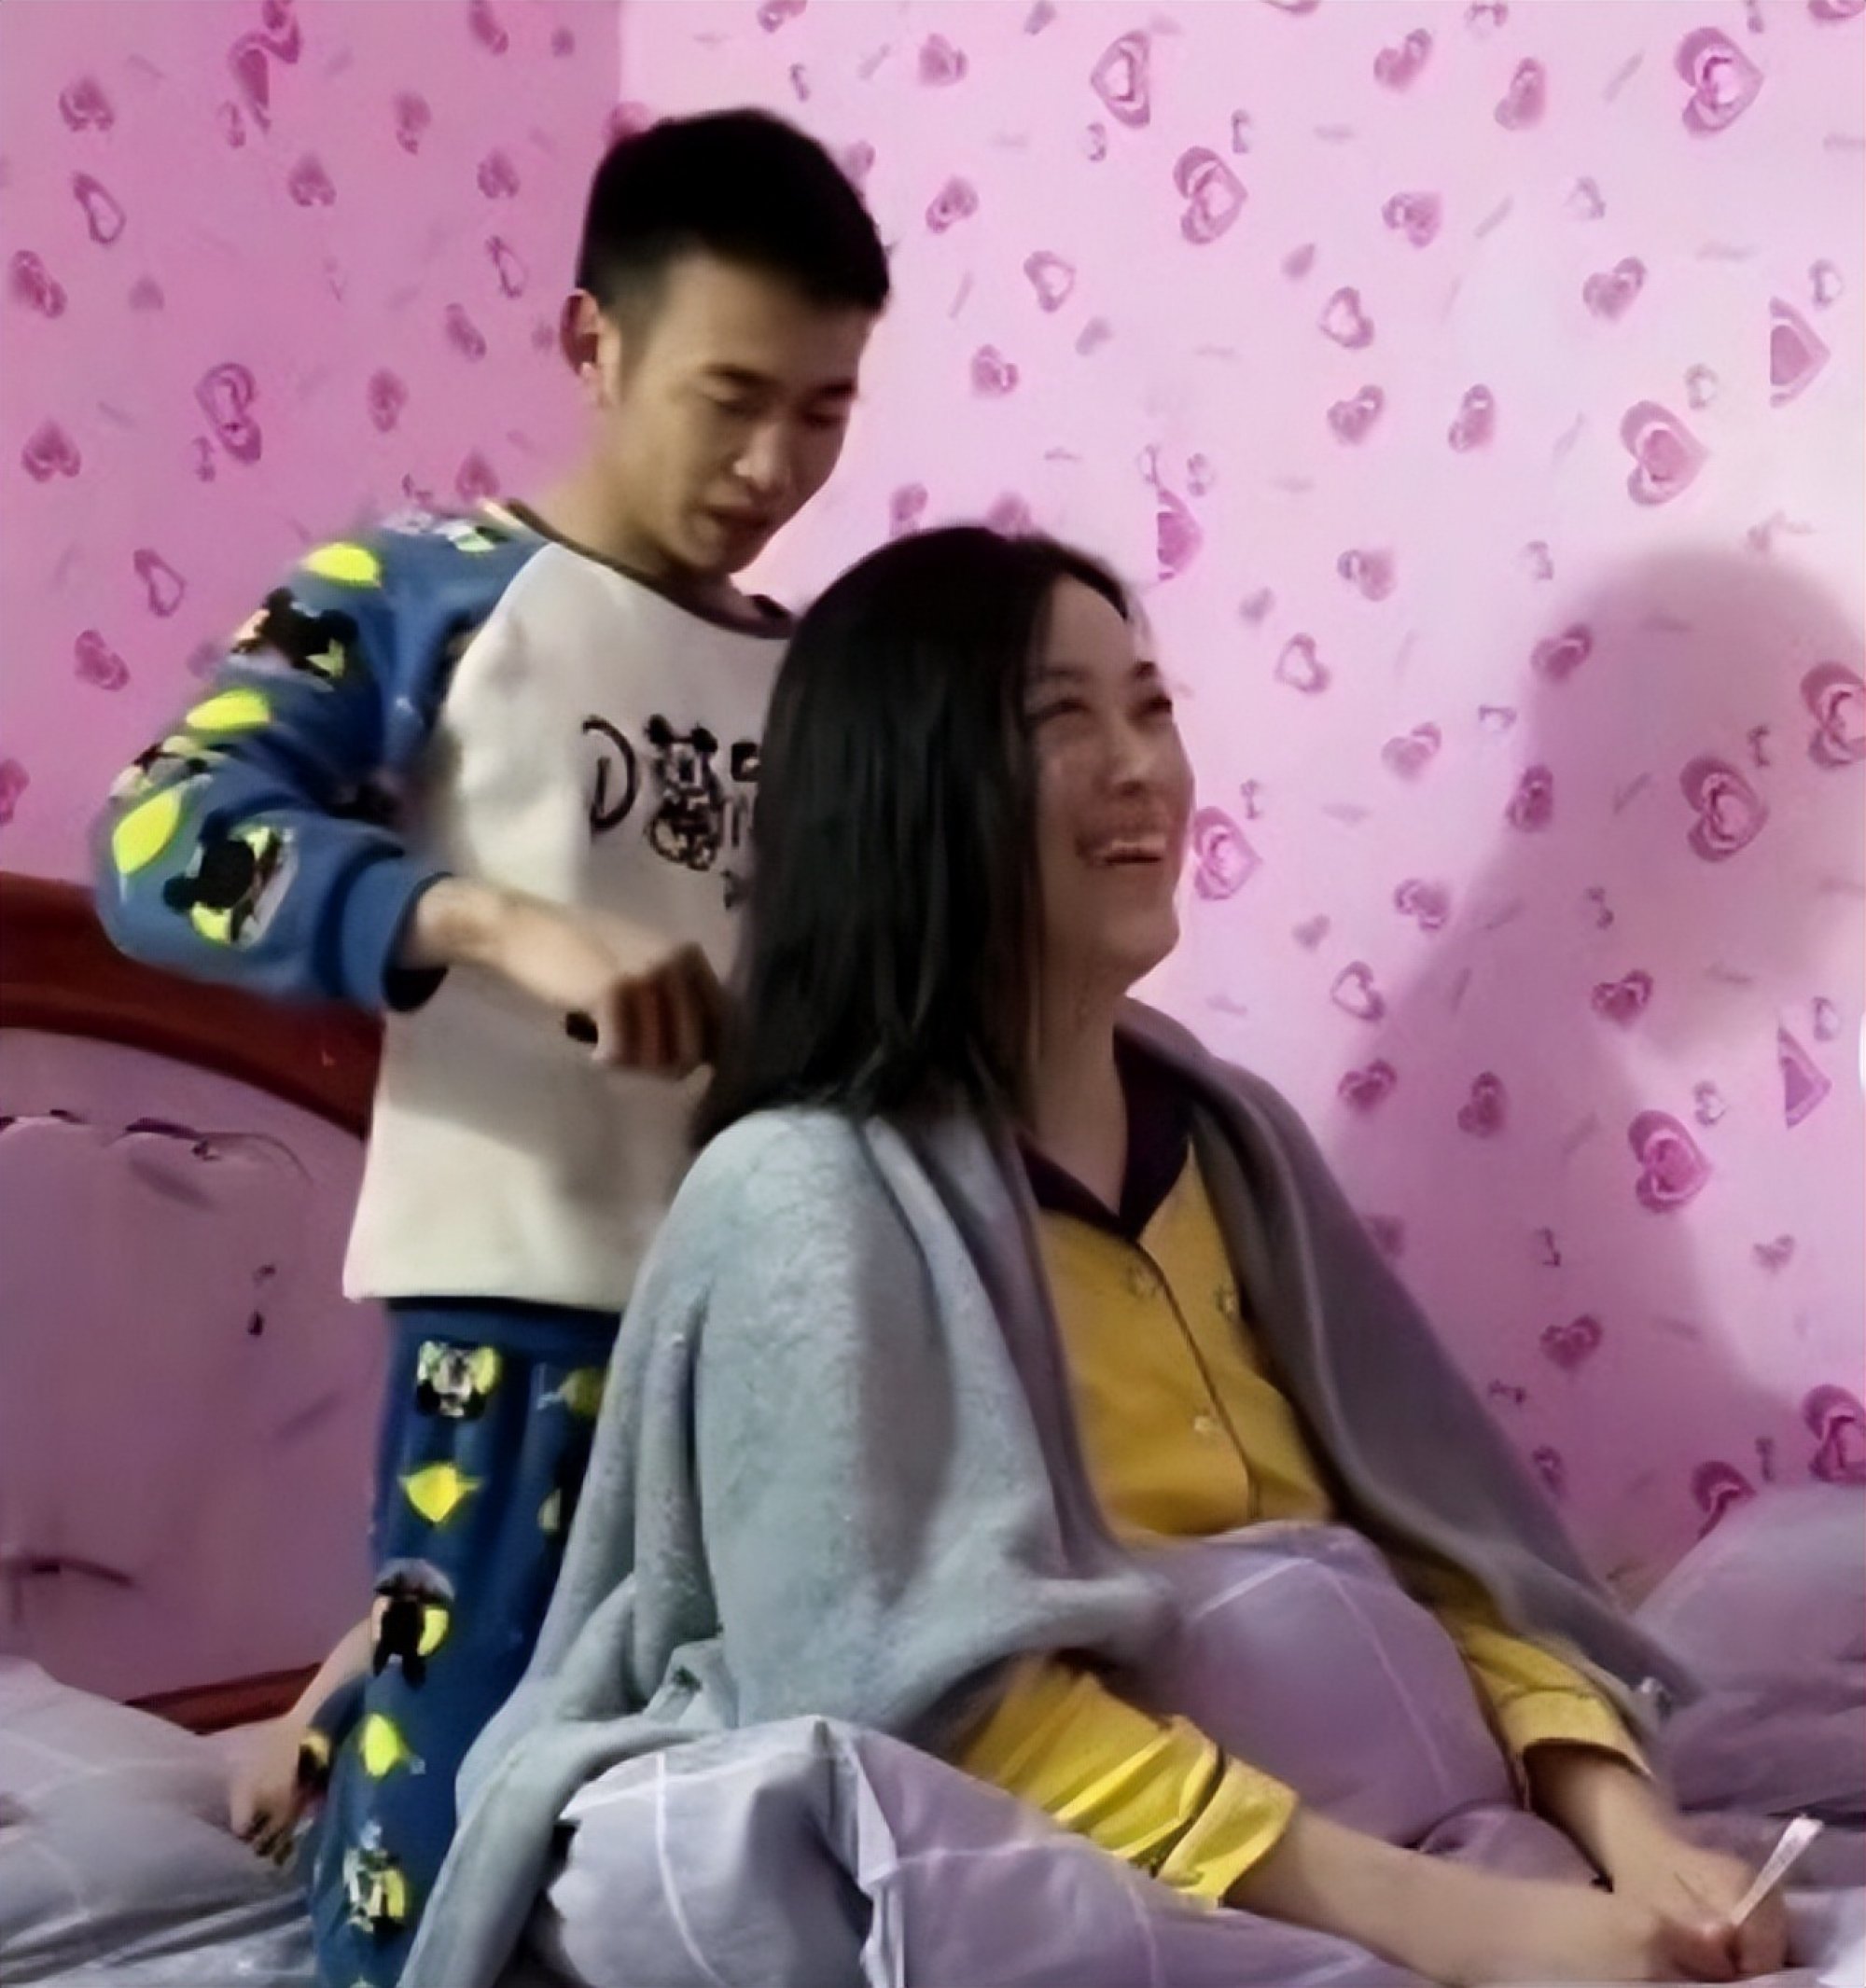 After Yin was injured a second time Zhao took full responsibility for her care, including cutting her nails and washing and combing her hair. Photo: Toutiao